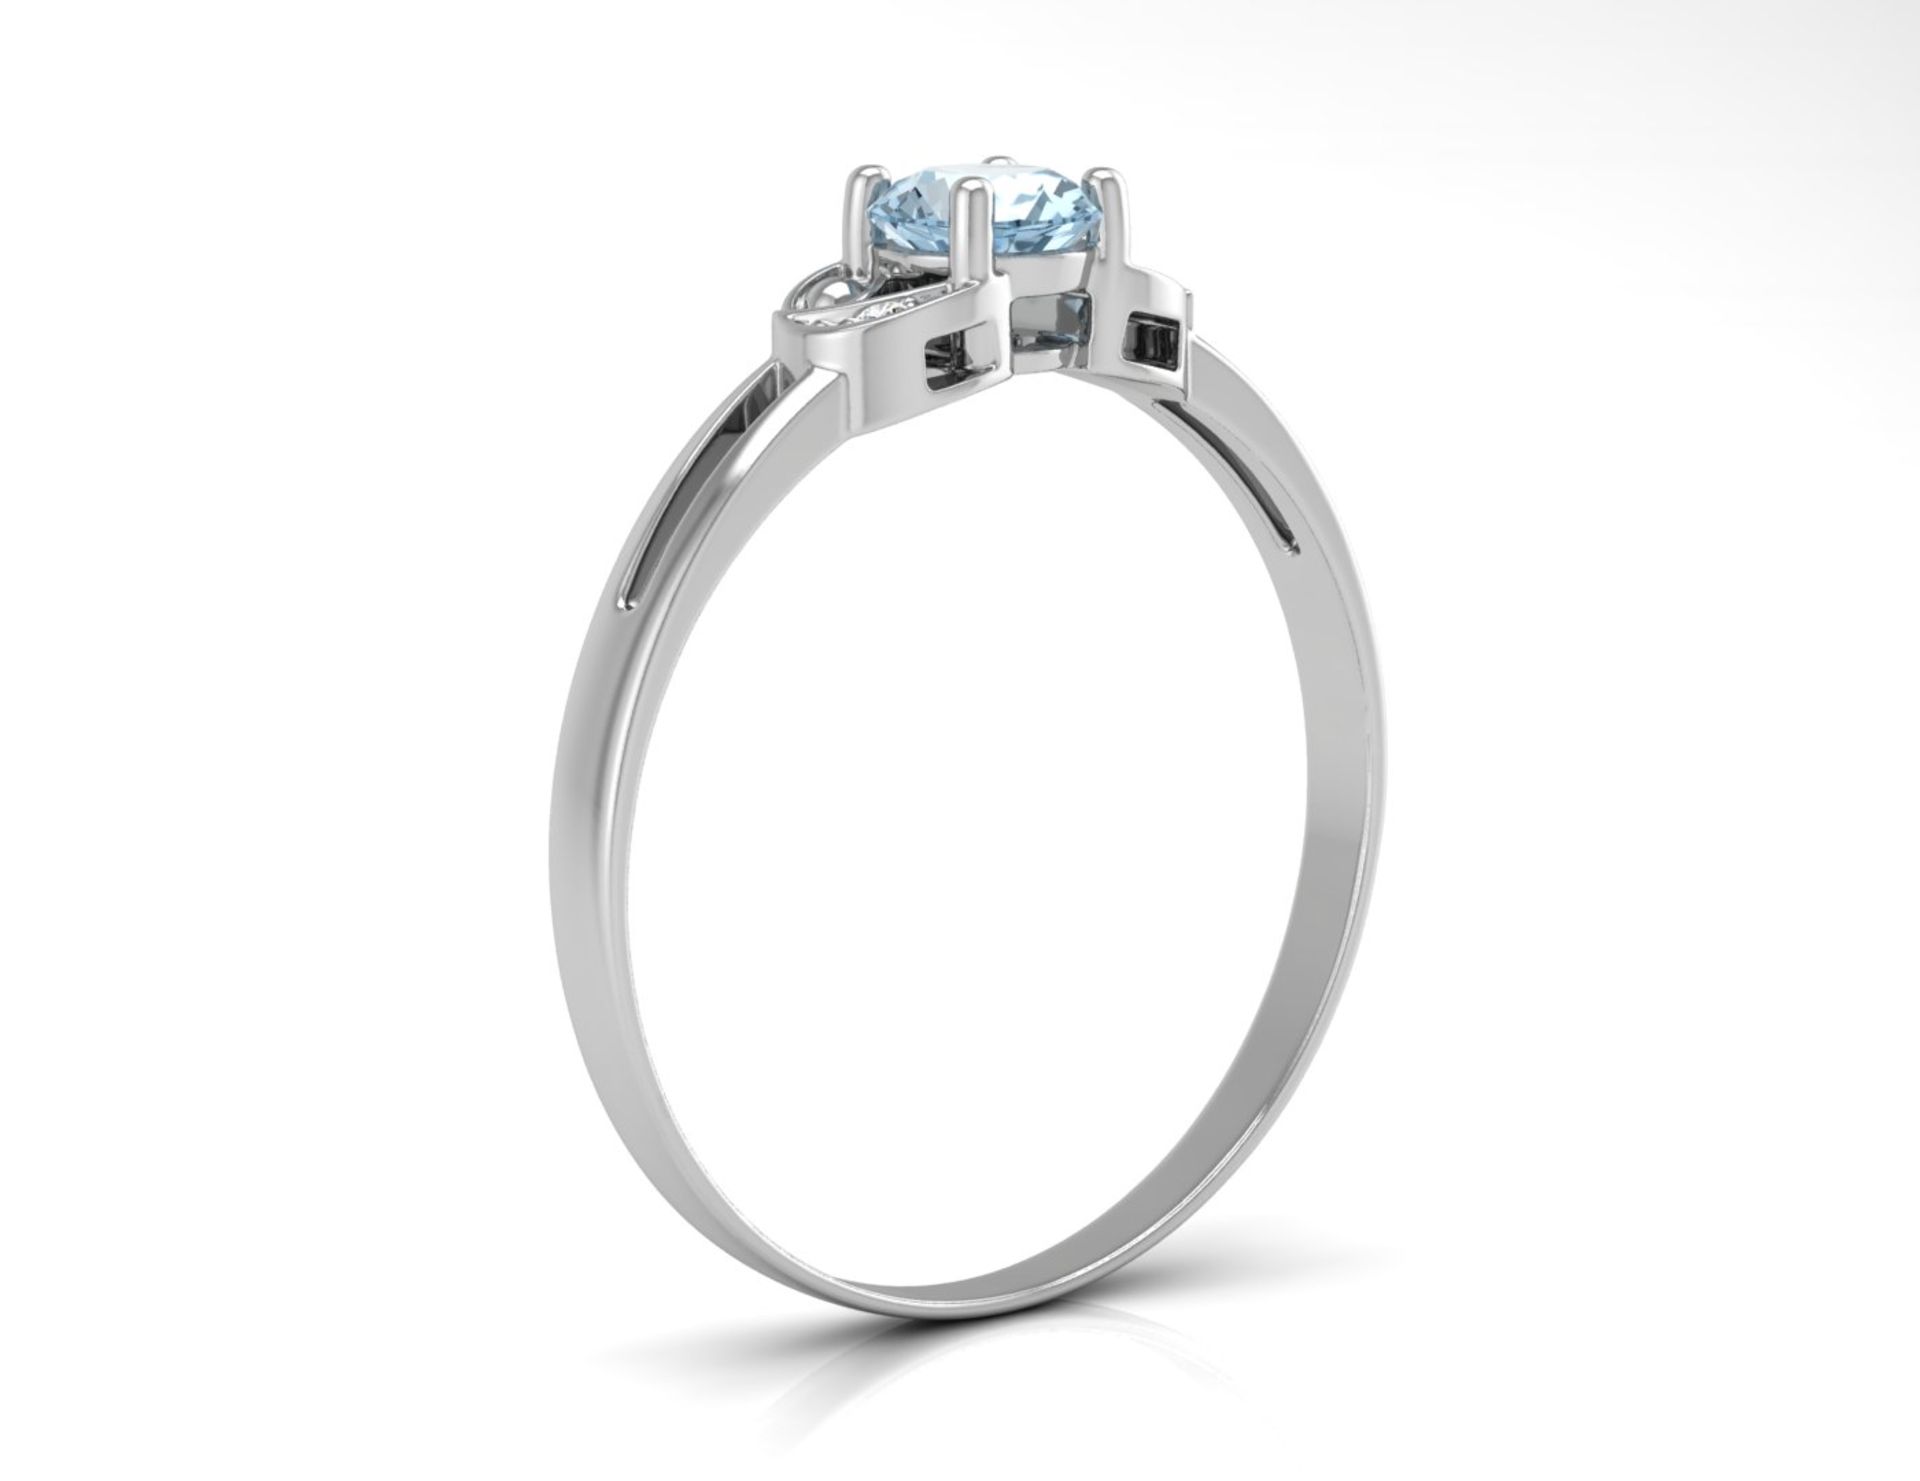 9ct White Gold Fancy Cluster Diamond And Blue Topaz Ring 0.01 Carats - Valued by GIE £800.00 - 9ct - Image 2 of 5